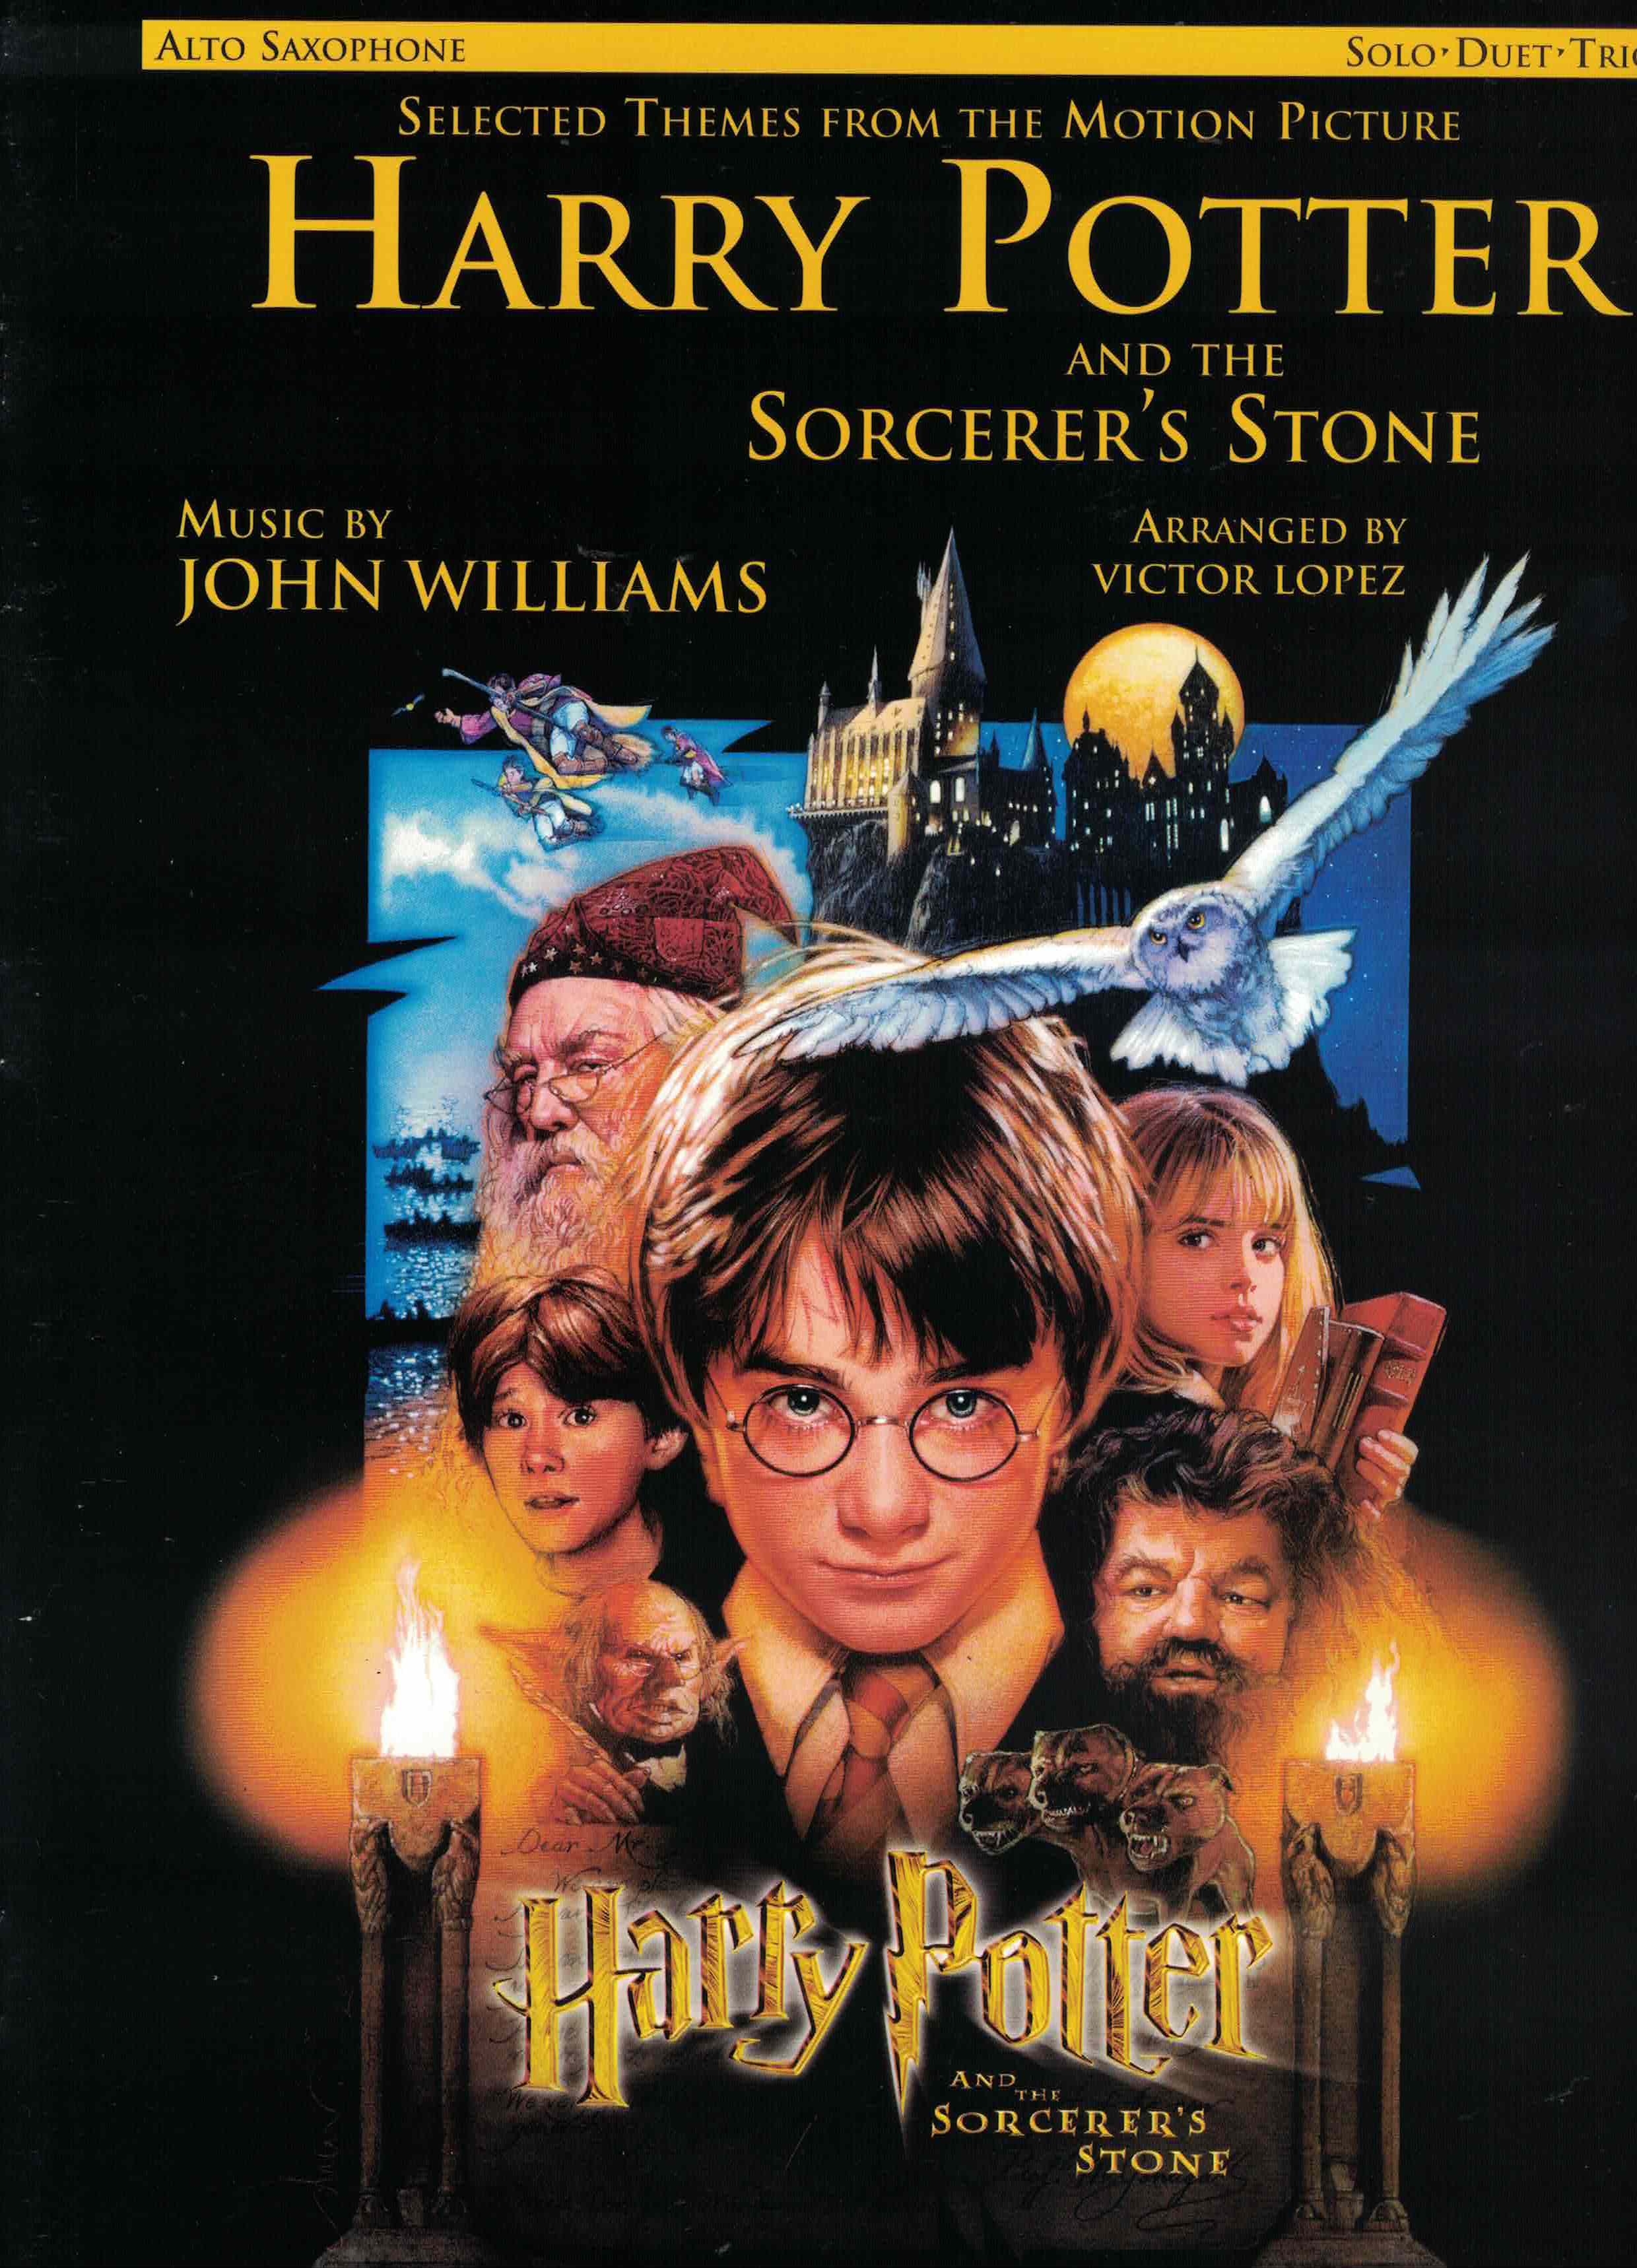 Harry Potter and the Sorcerers Stone, Alt- Sax